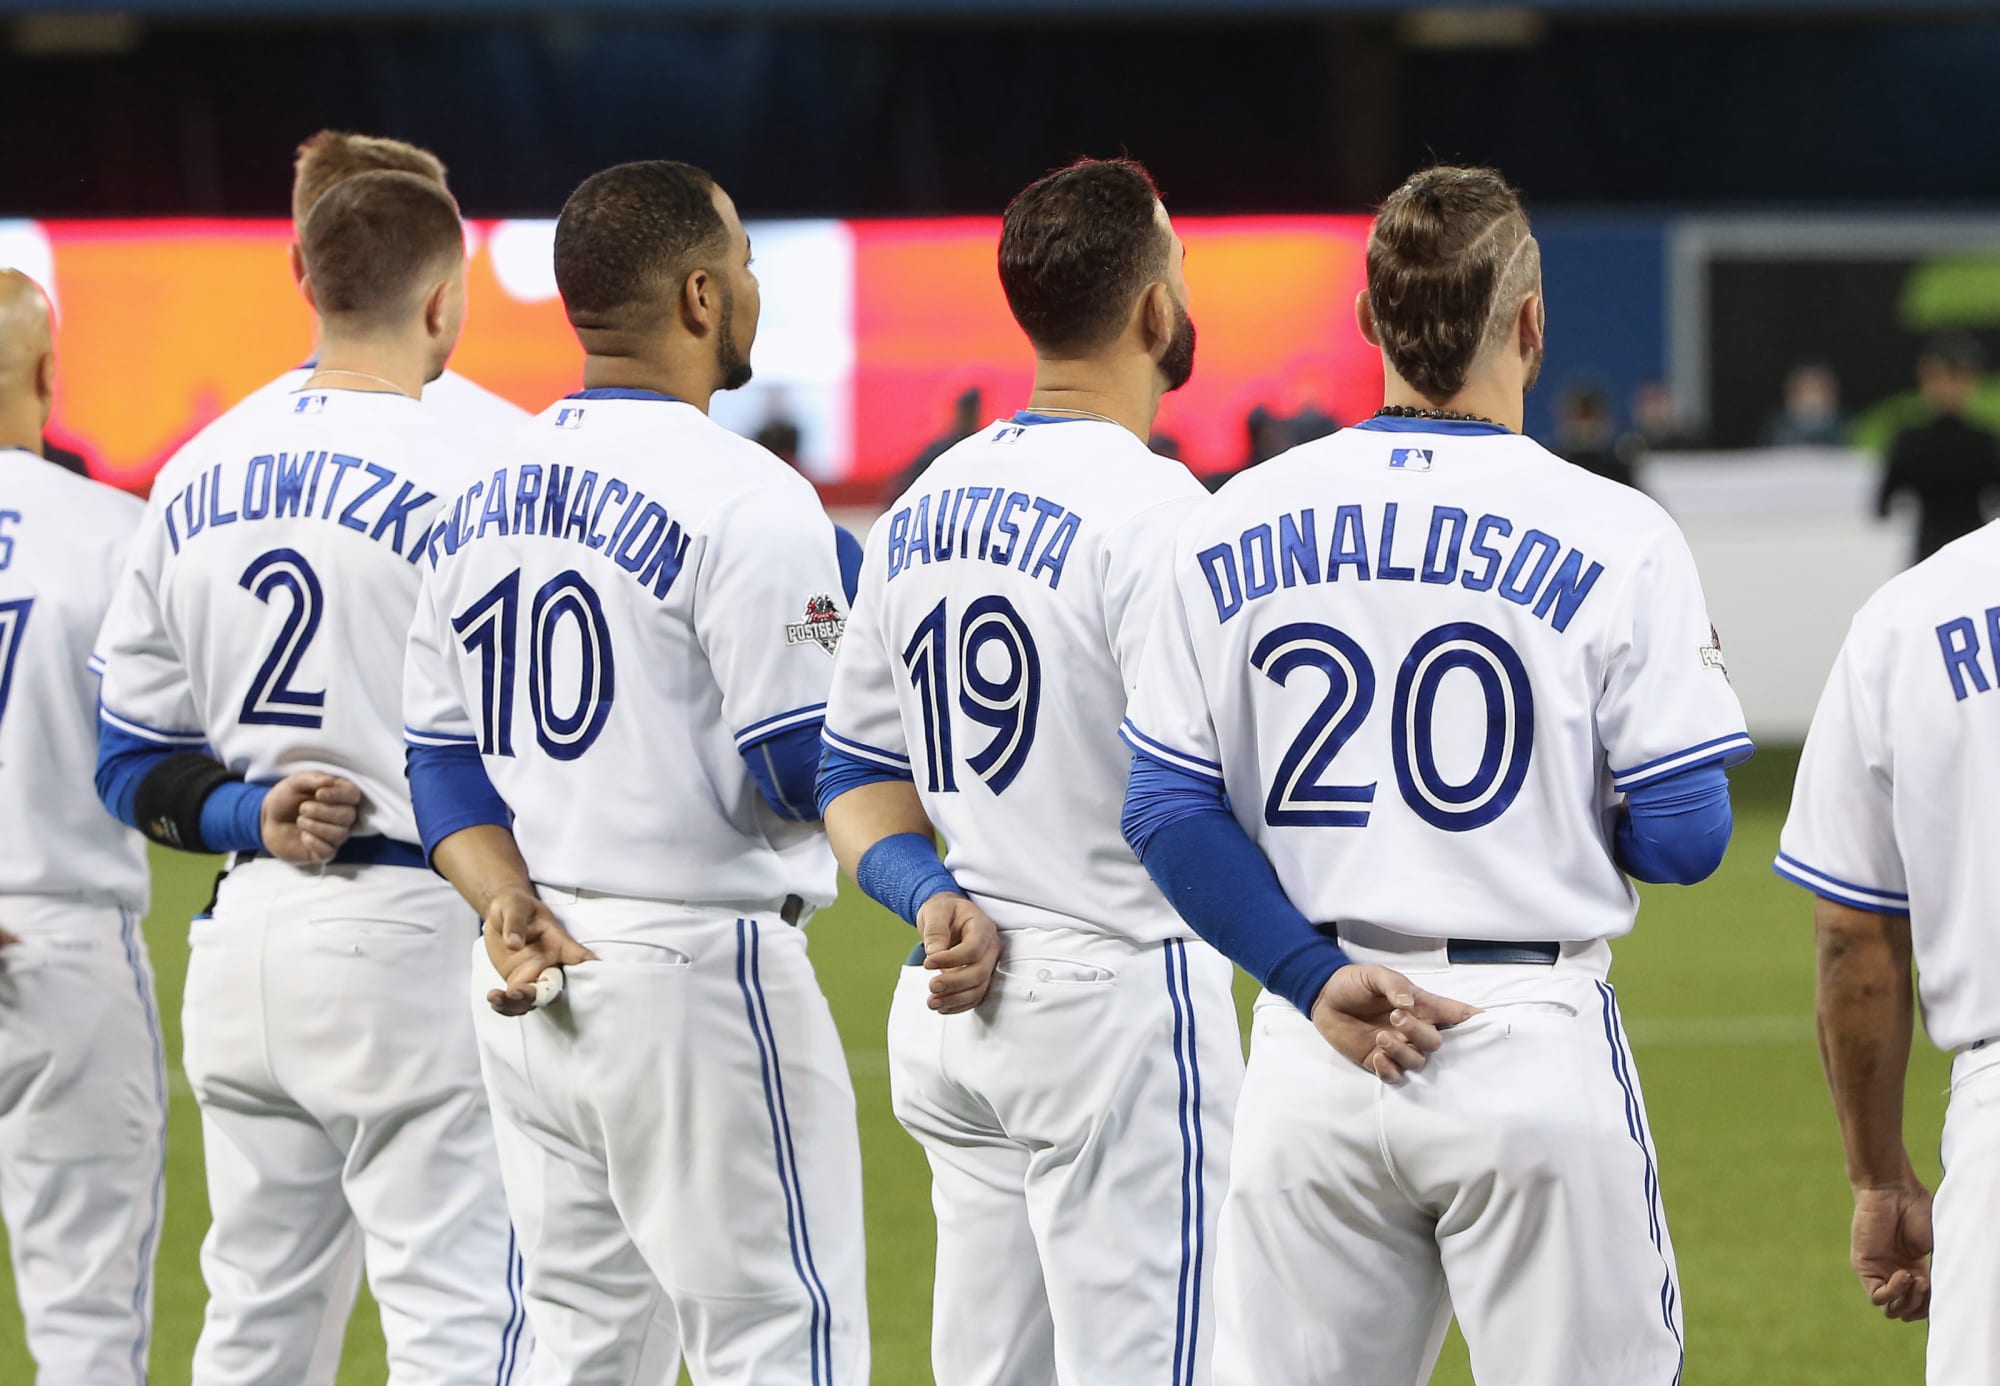 Blue Jays Only 38 of the 2016 playoff team are still in MLB